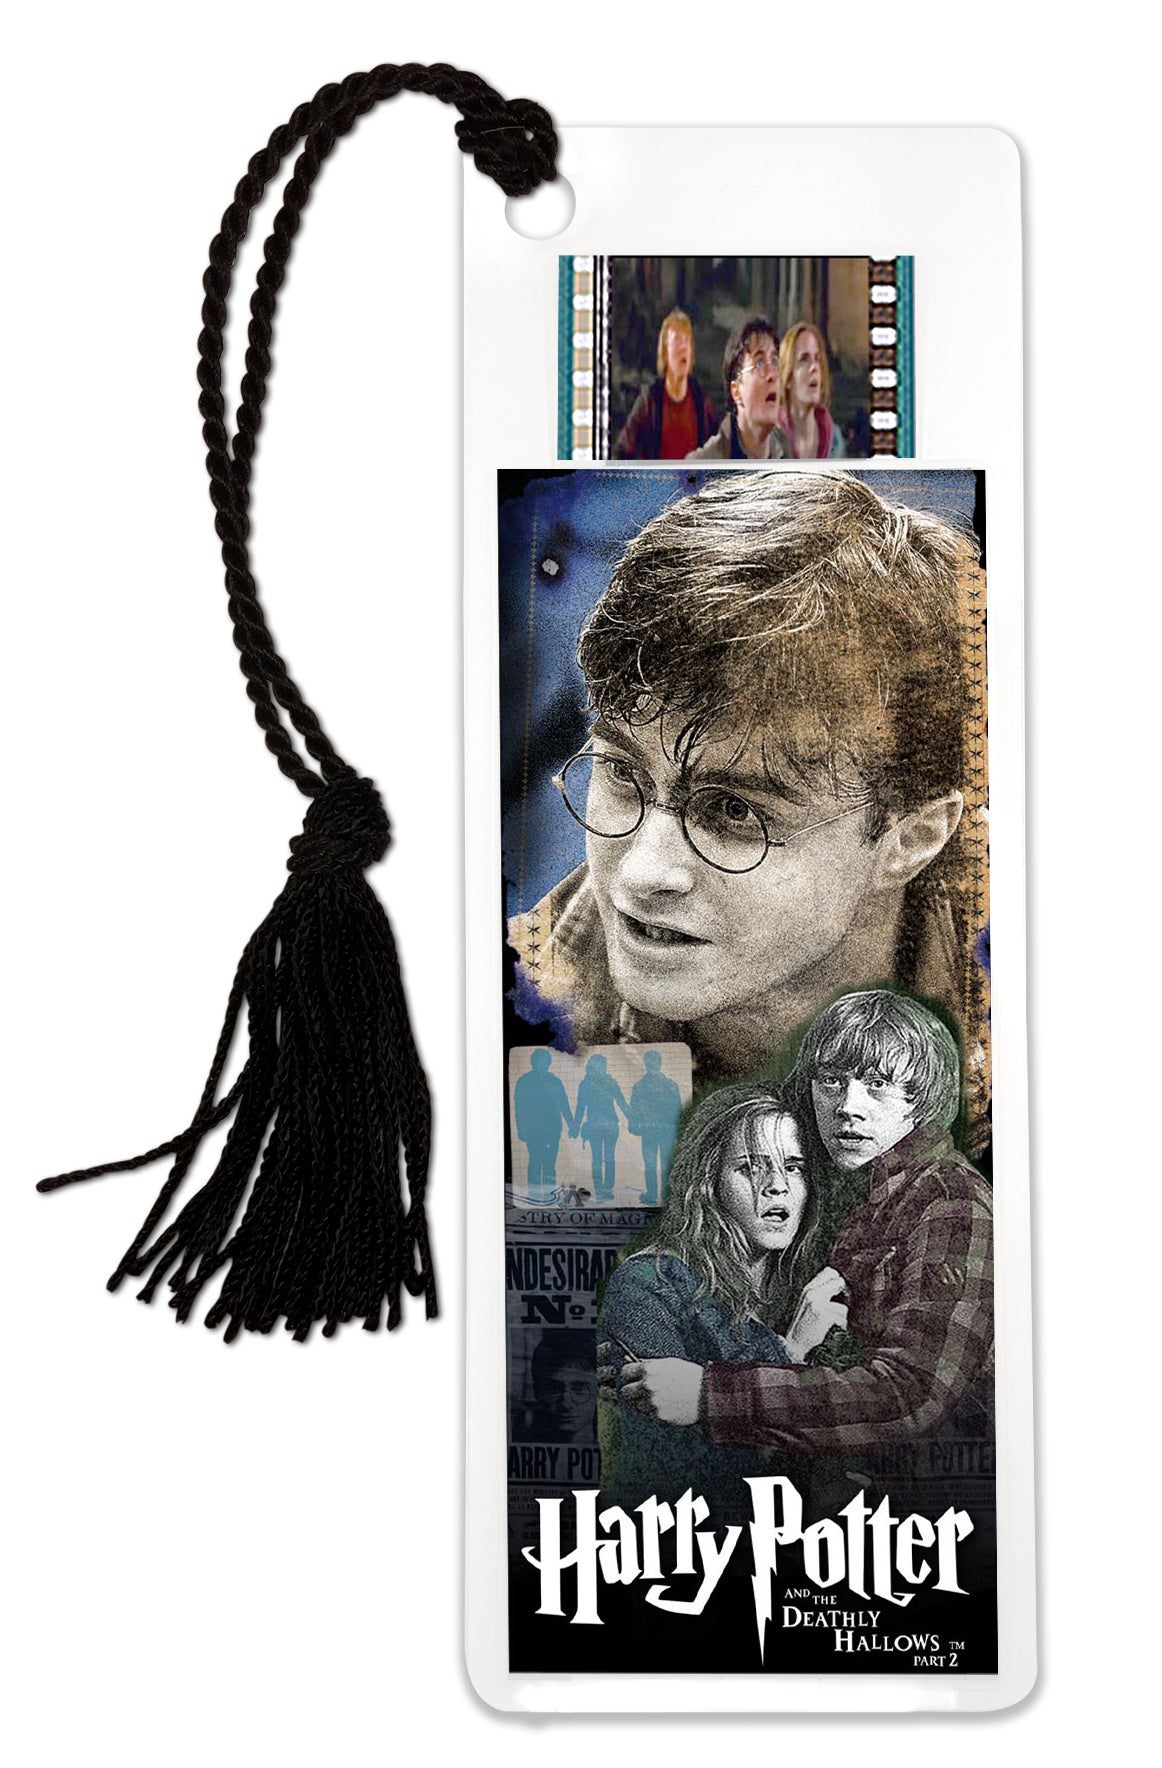 Harry Potter and the Deathly Hallows: Part 2 (The Trio Finale) FilmCells™ Bookmark USBM595